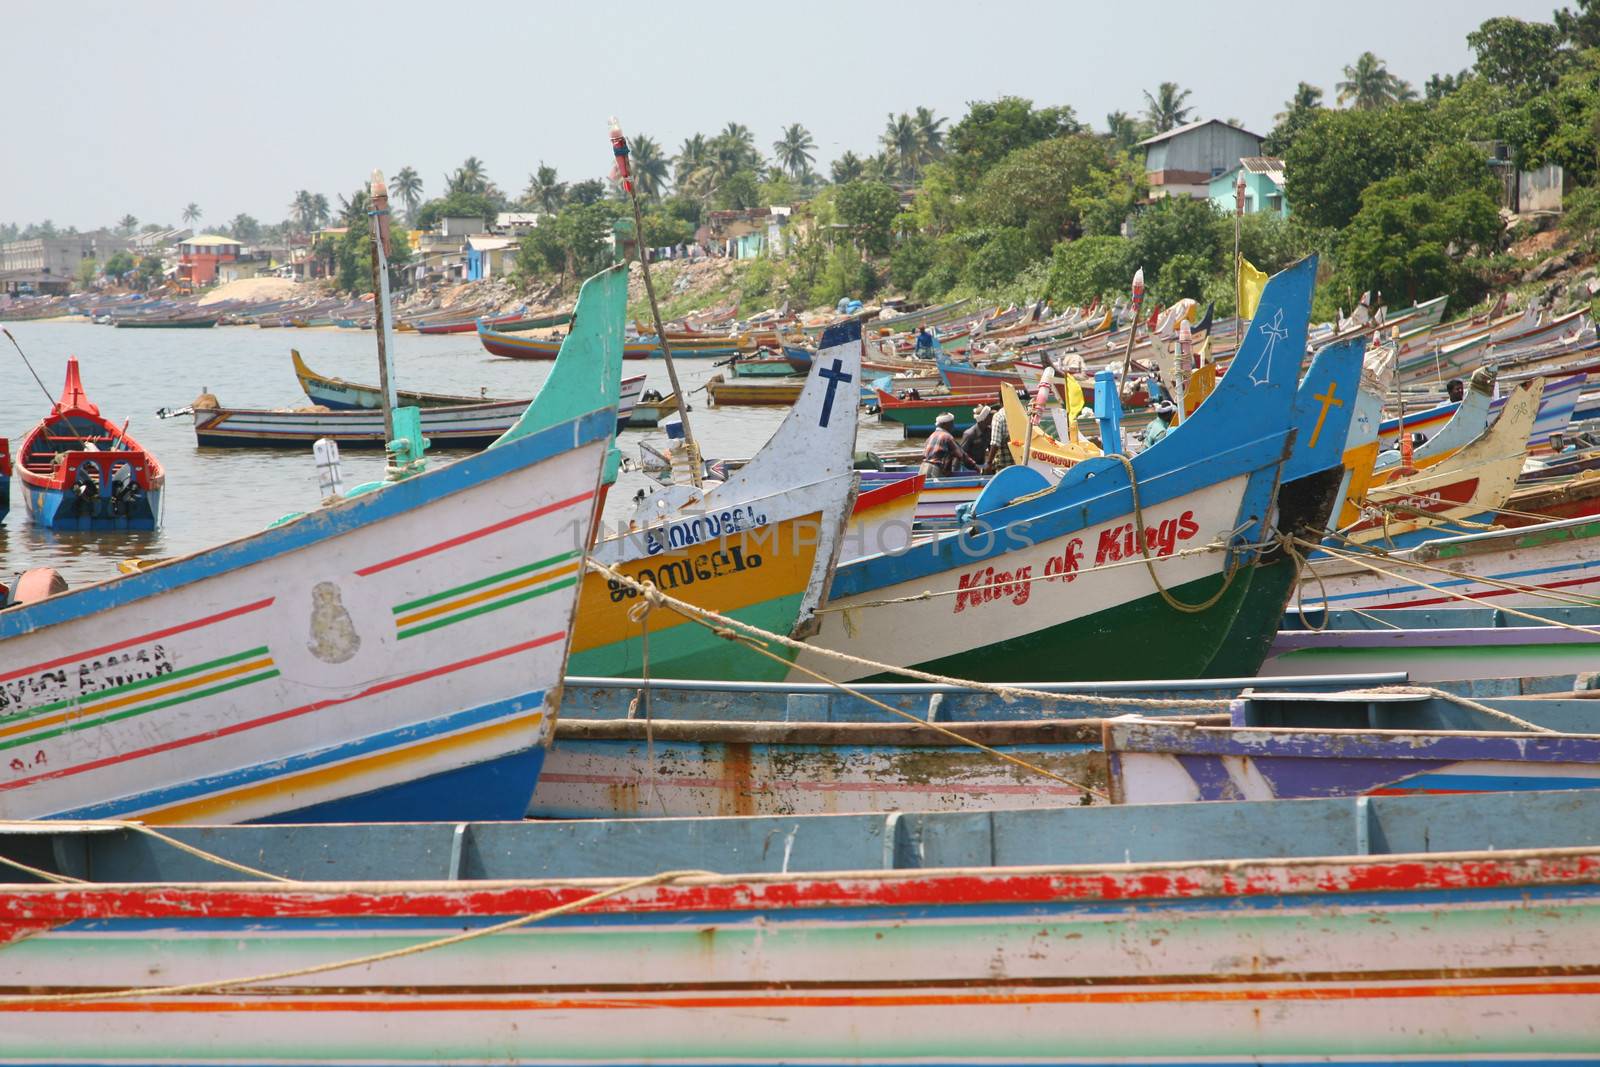 Detail of ships in Kerala, India by watchtheworld